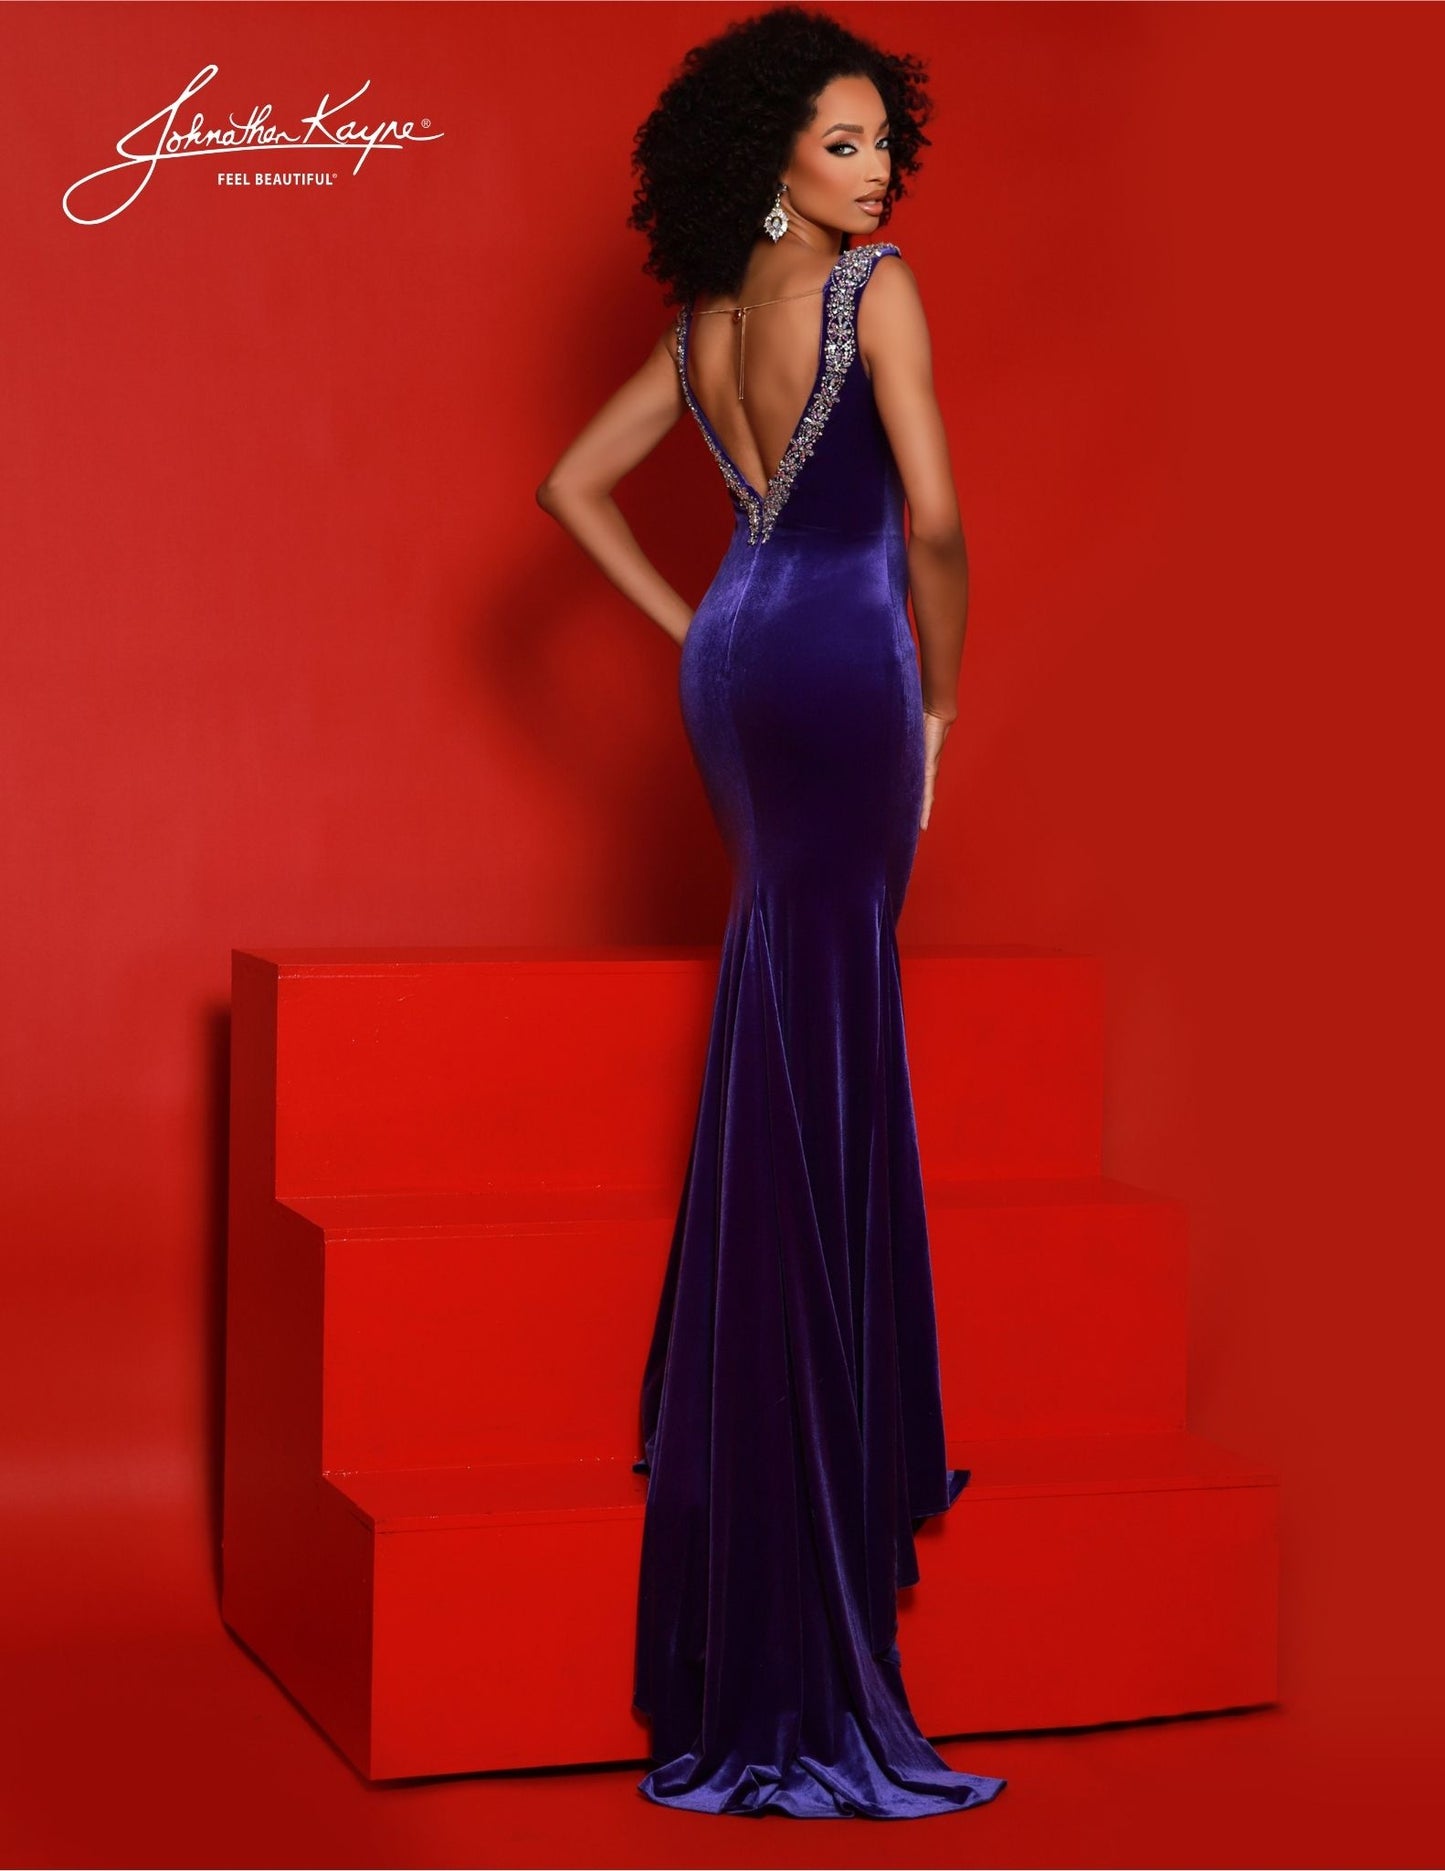 Featuring a low V-neckline, crystal straps, and a train, Johnathan Kayne 2877 is the perfect formal dress for special occasions. A beautiful velvet gown that flatters the figure with a beautiful silhouette, this Johnathan Kayne creation is sure to make a statement. Elegance knows no bounds in this stretch velvet gown. Adorned with encrusted crystal straps and a sultry low-V neckline, this gown exudes opulence and elegance. 